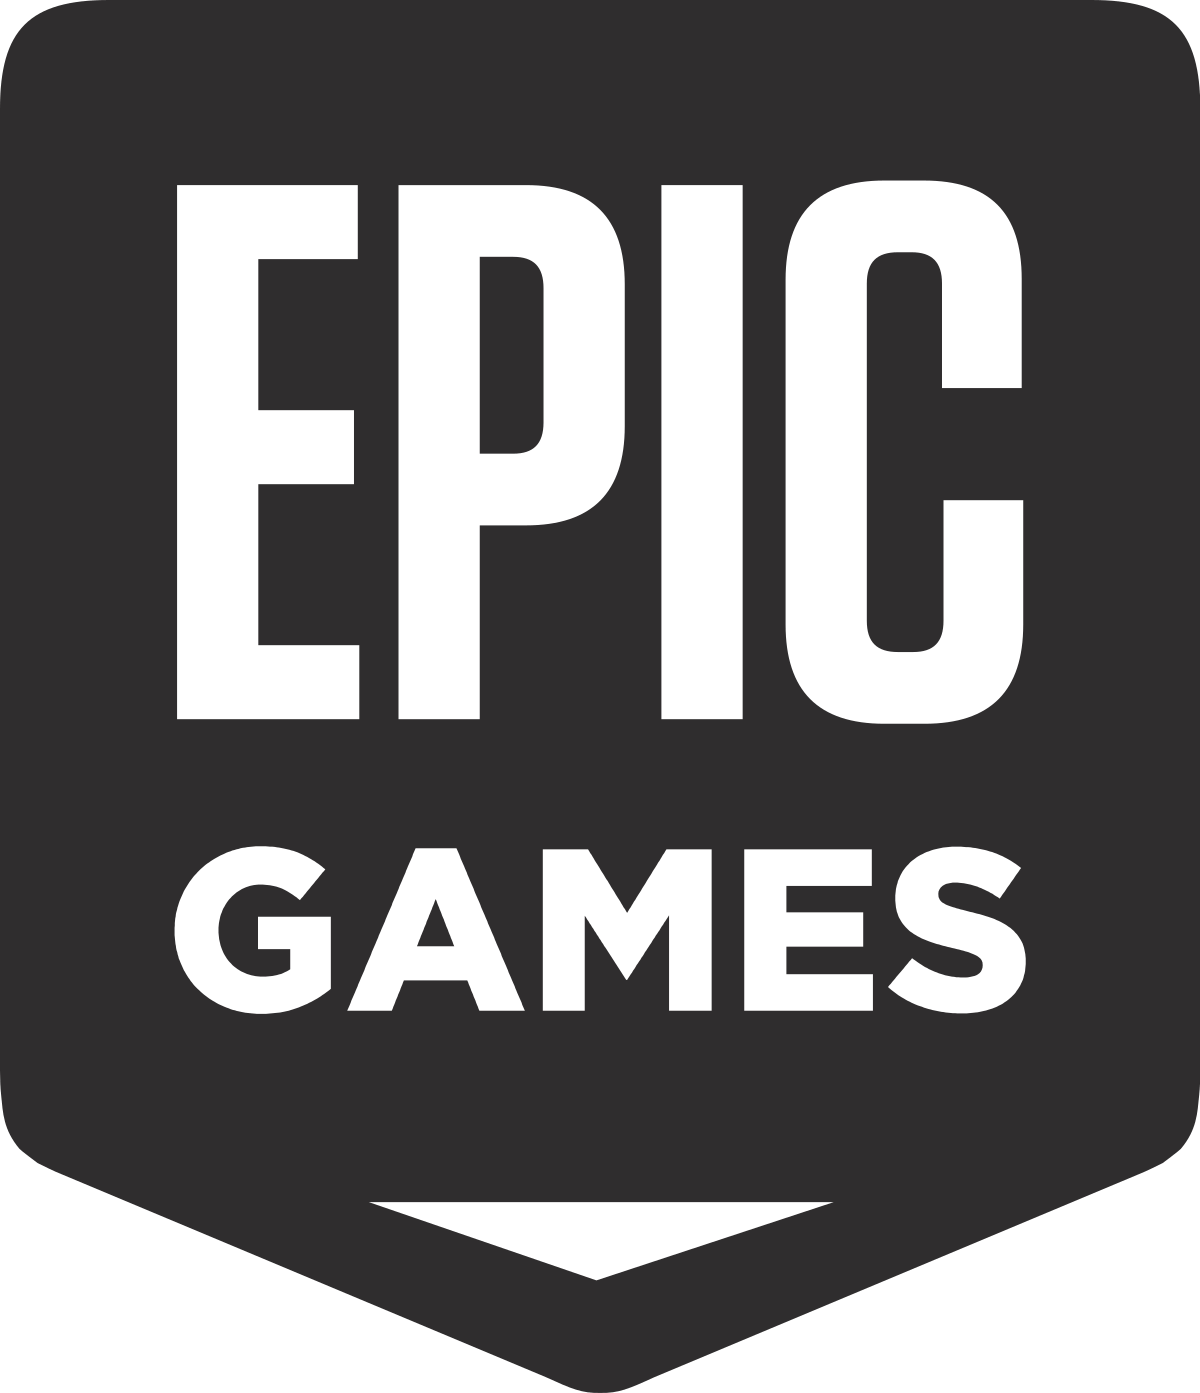 Epic Games Logo - List of games by Epic Games